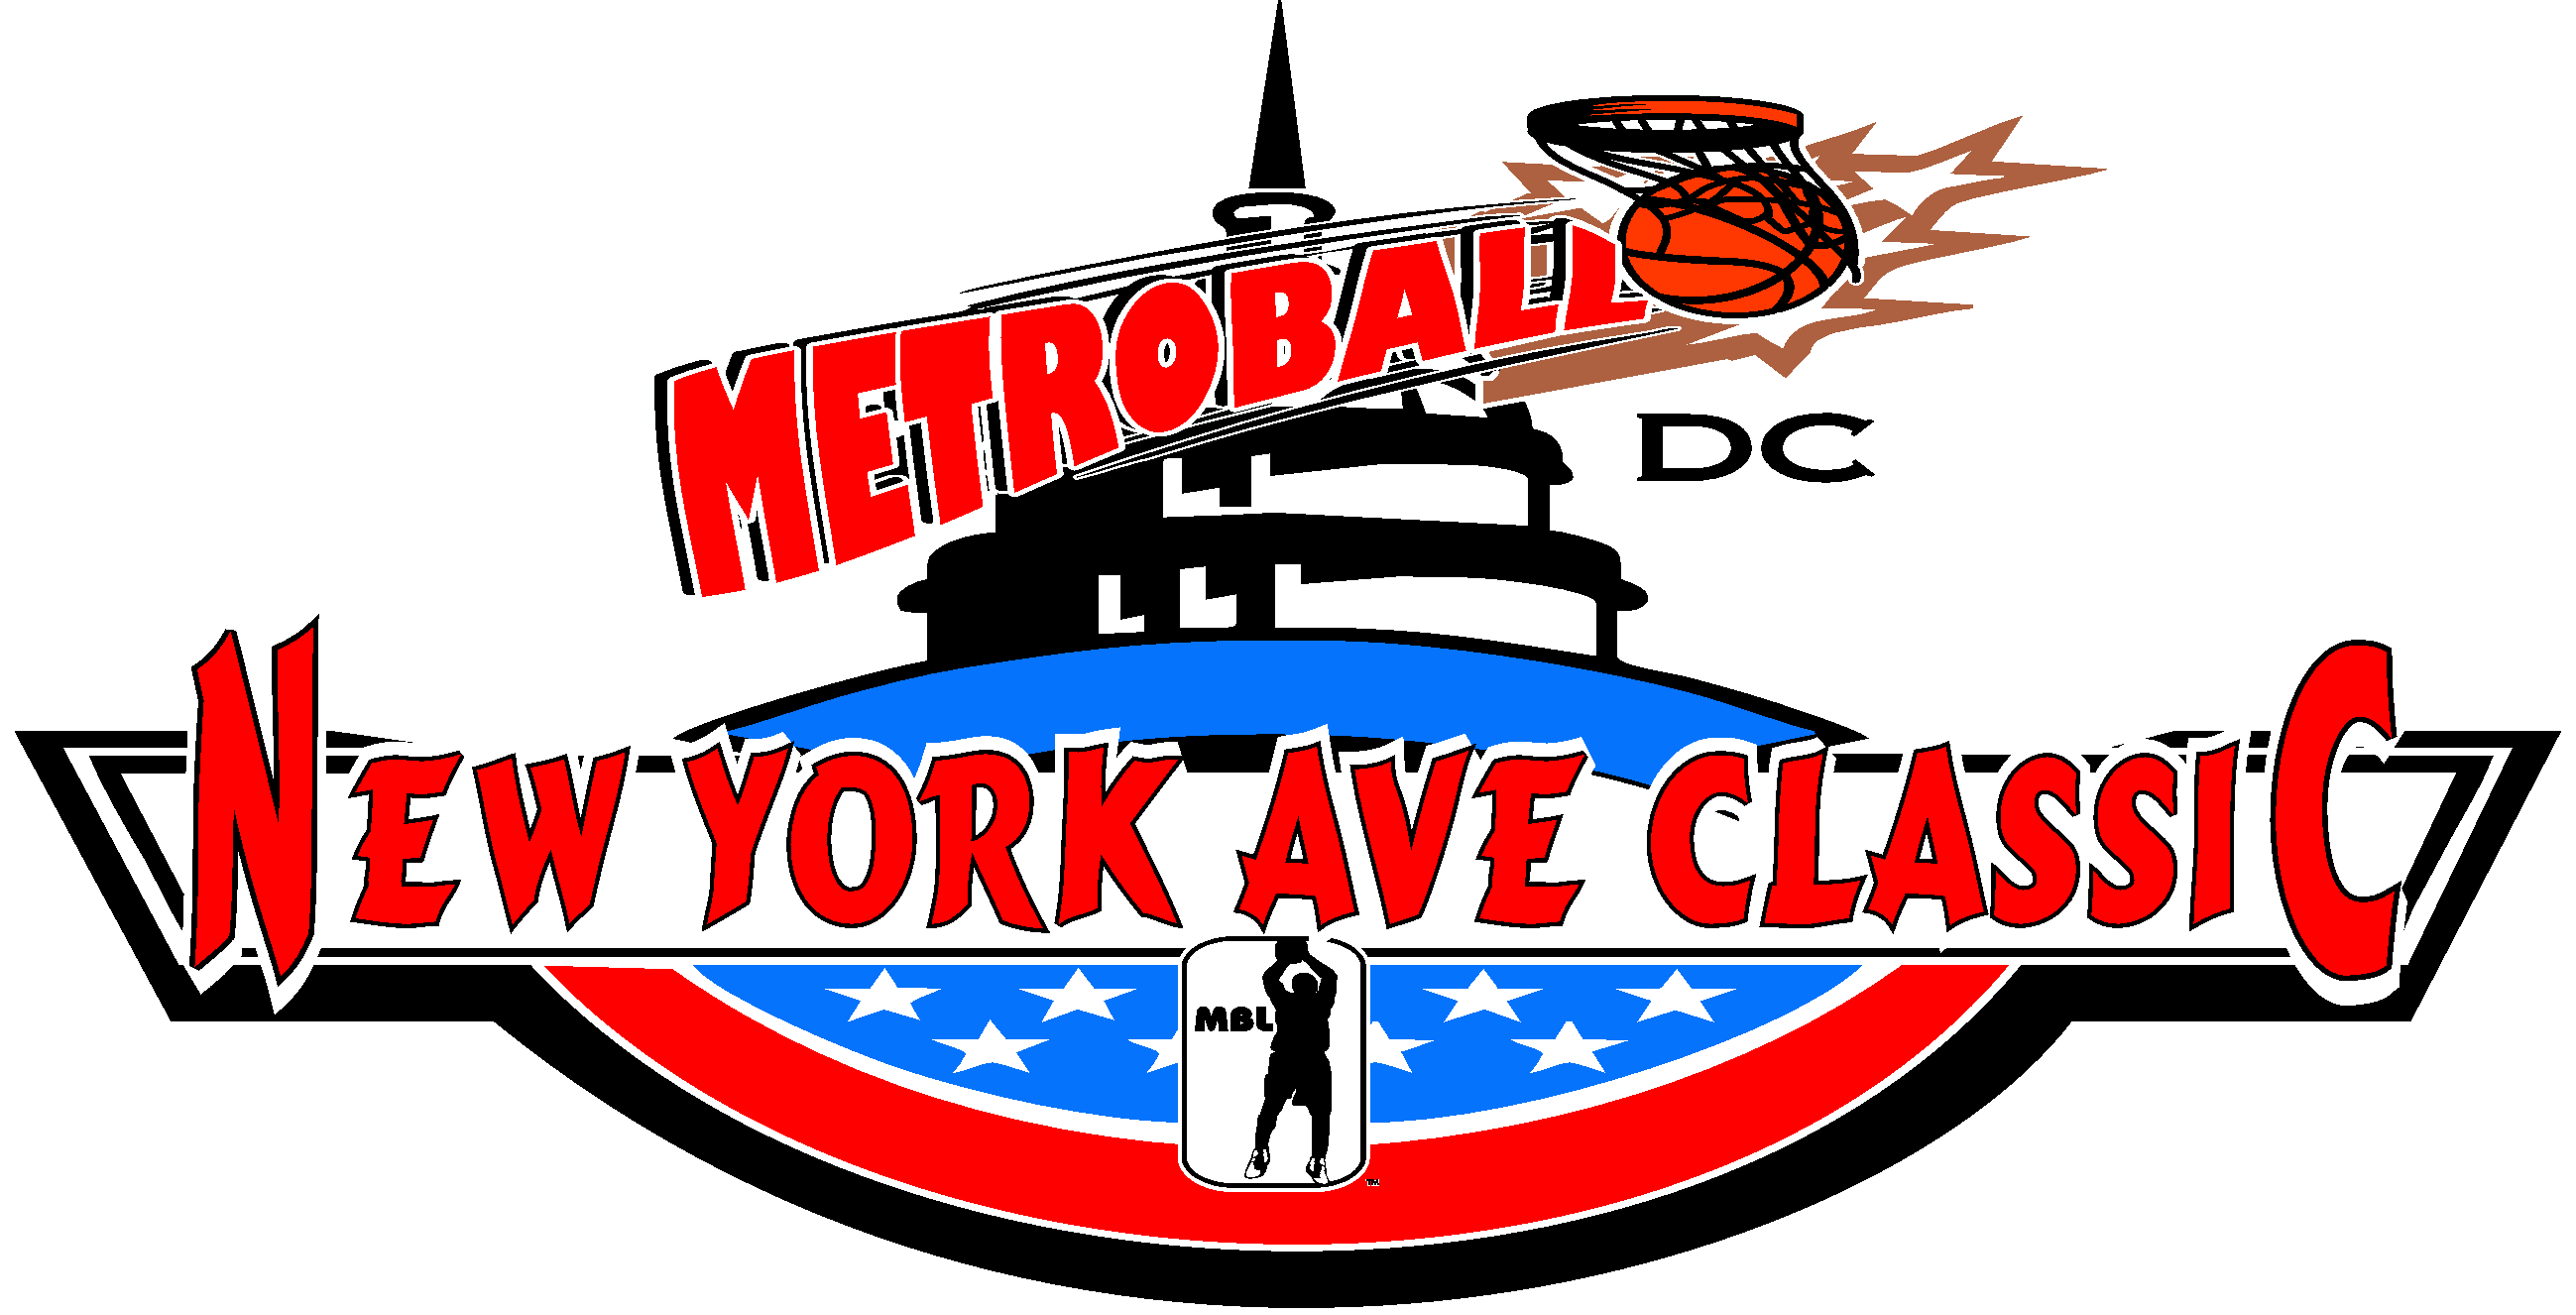 MetroBall Youth Outreach - Youth Basketball Programs2598 x 1326